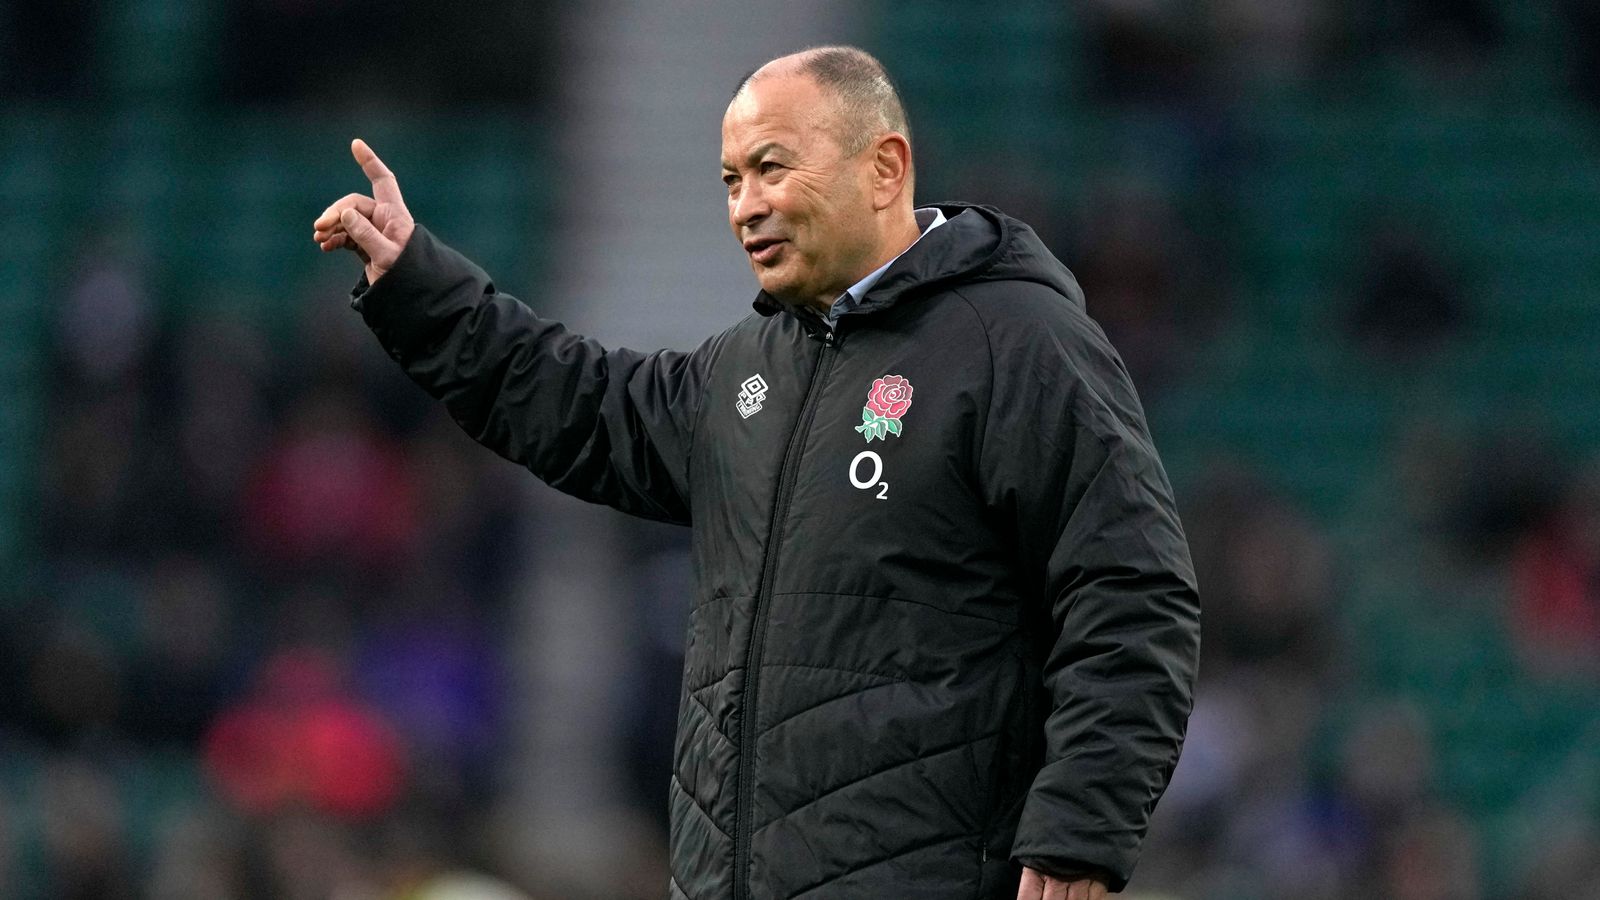 Eddie Jones sacked by England: Rugby coach leaves role after dismal Autumn Nations Series